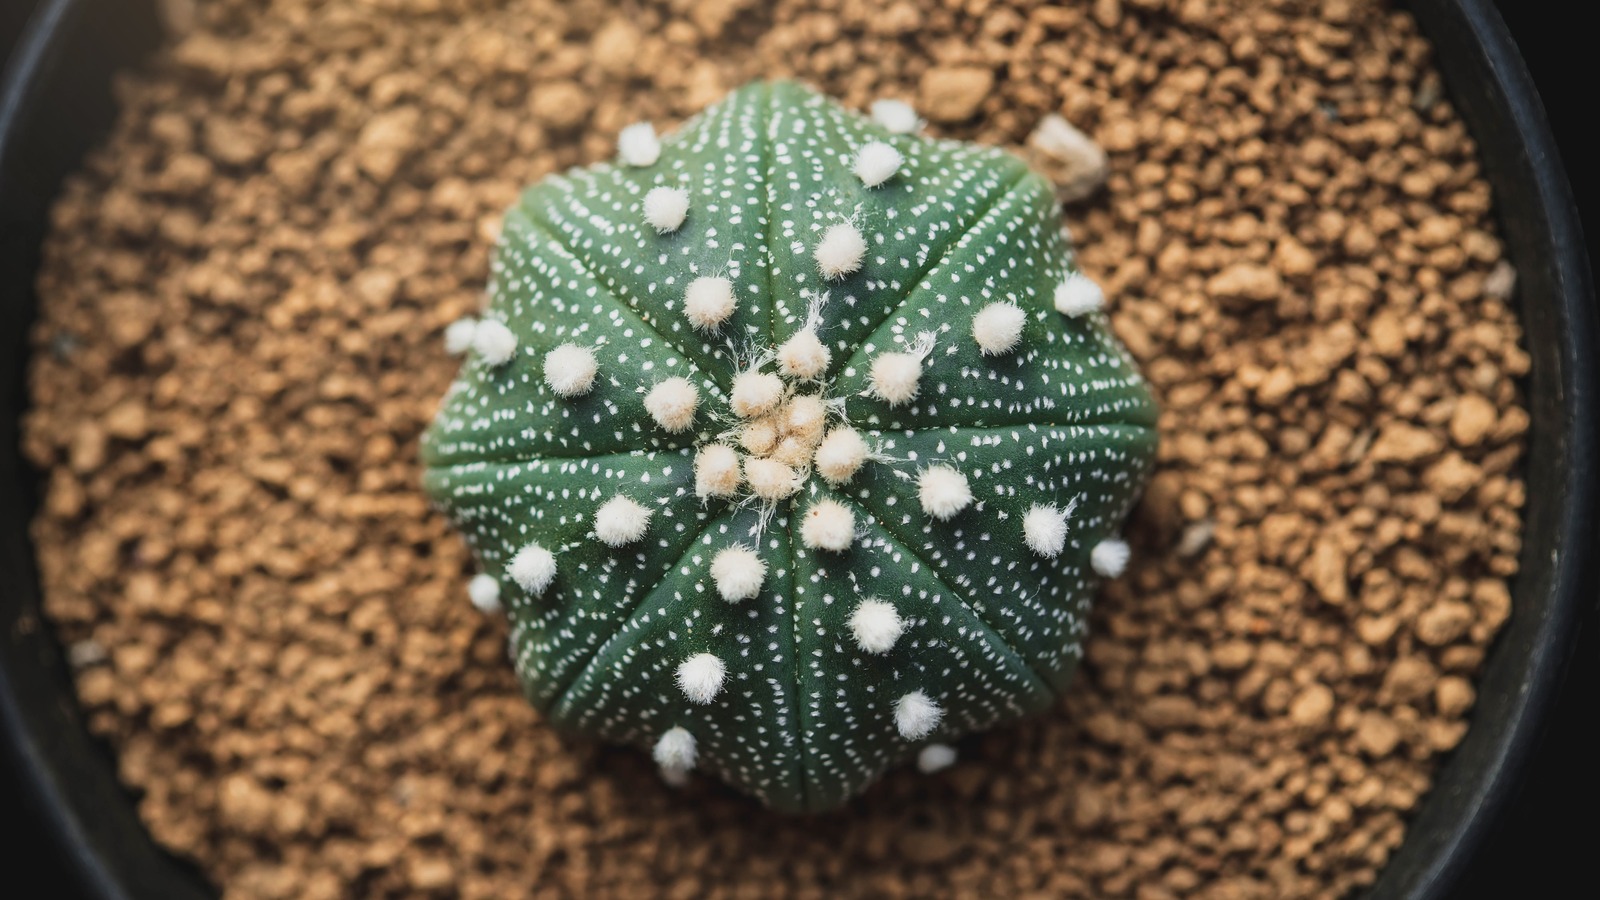 How to care for a star cactus